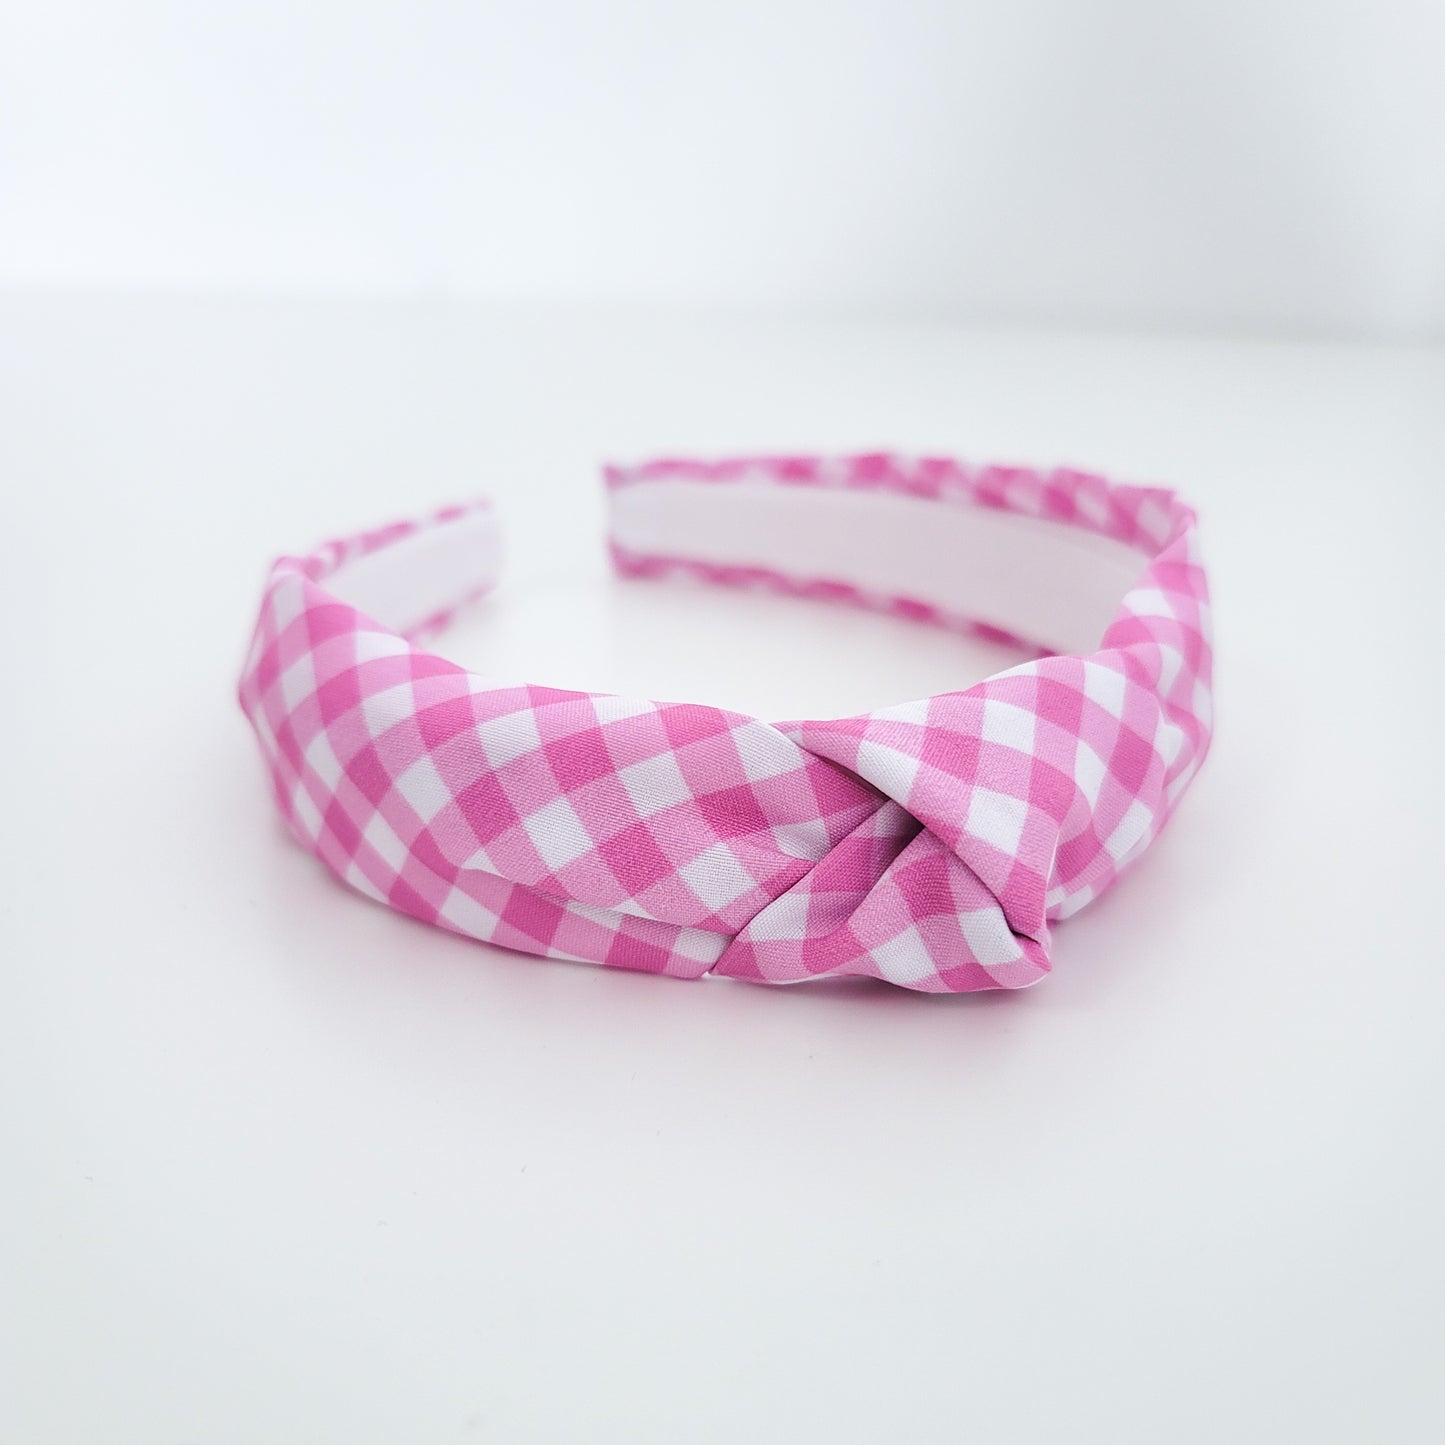 Knotted Headband - Pink Gingham